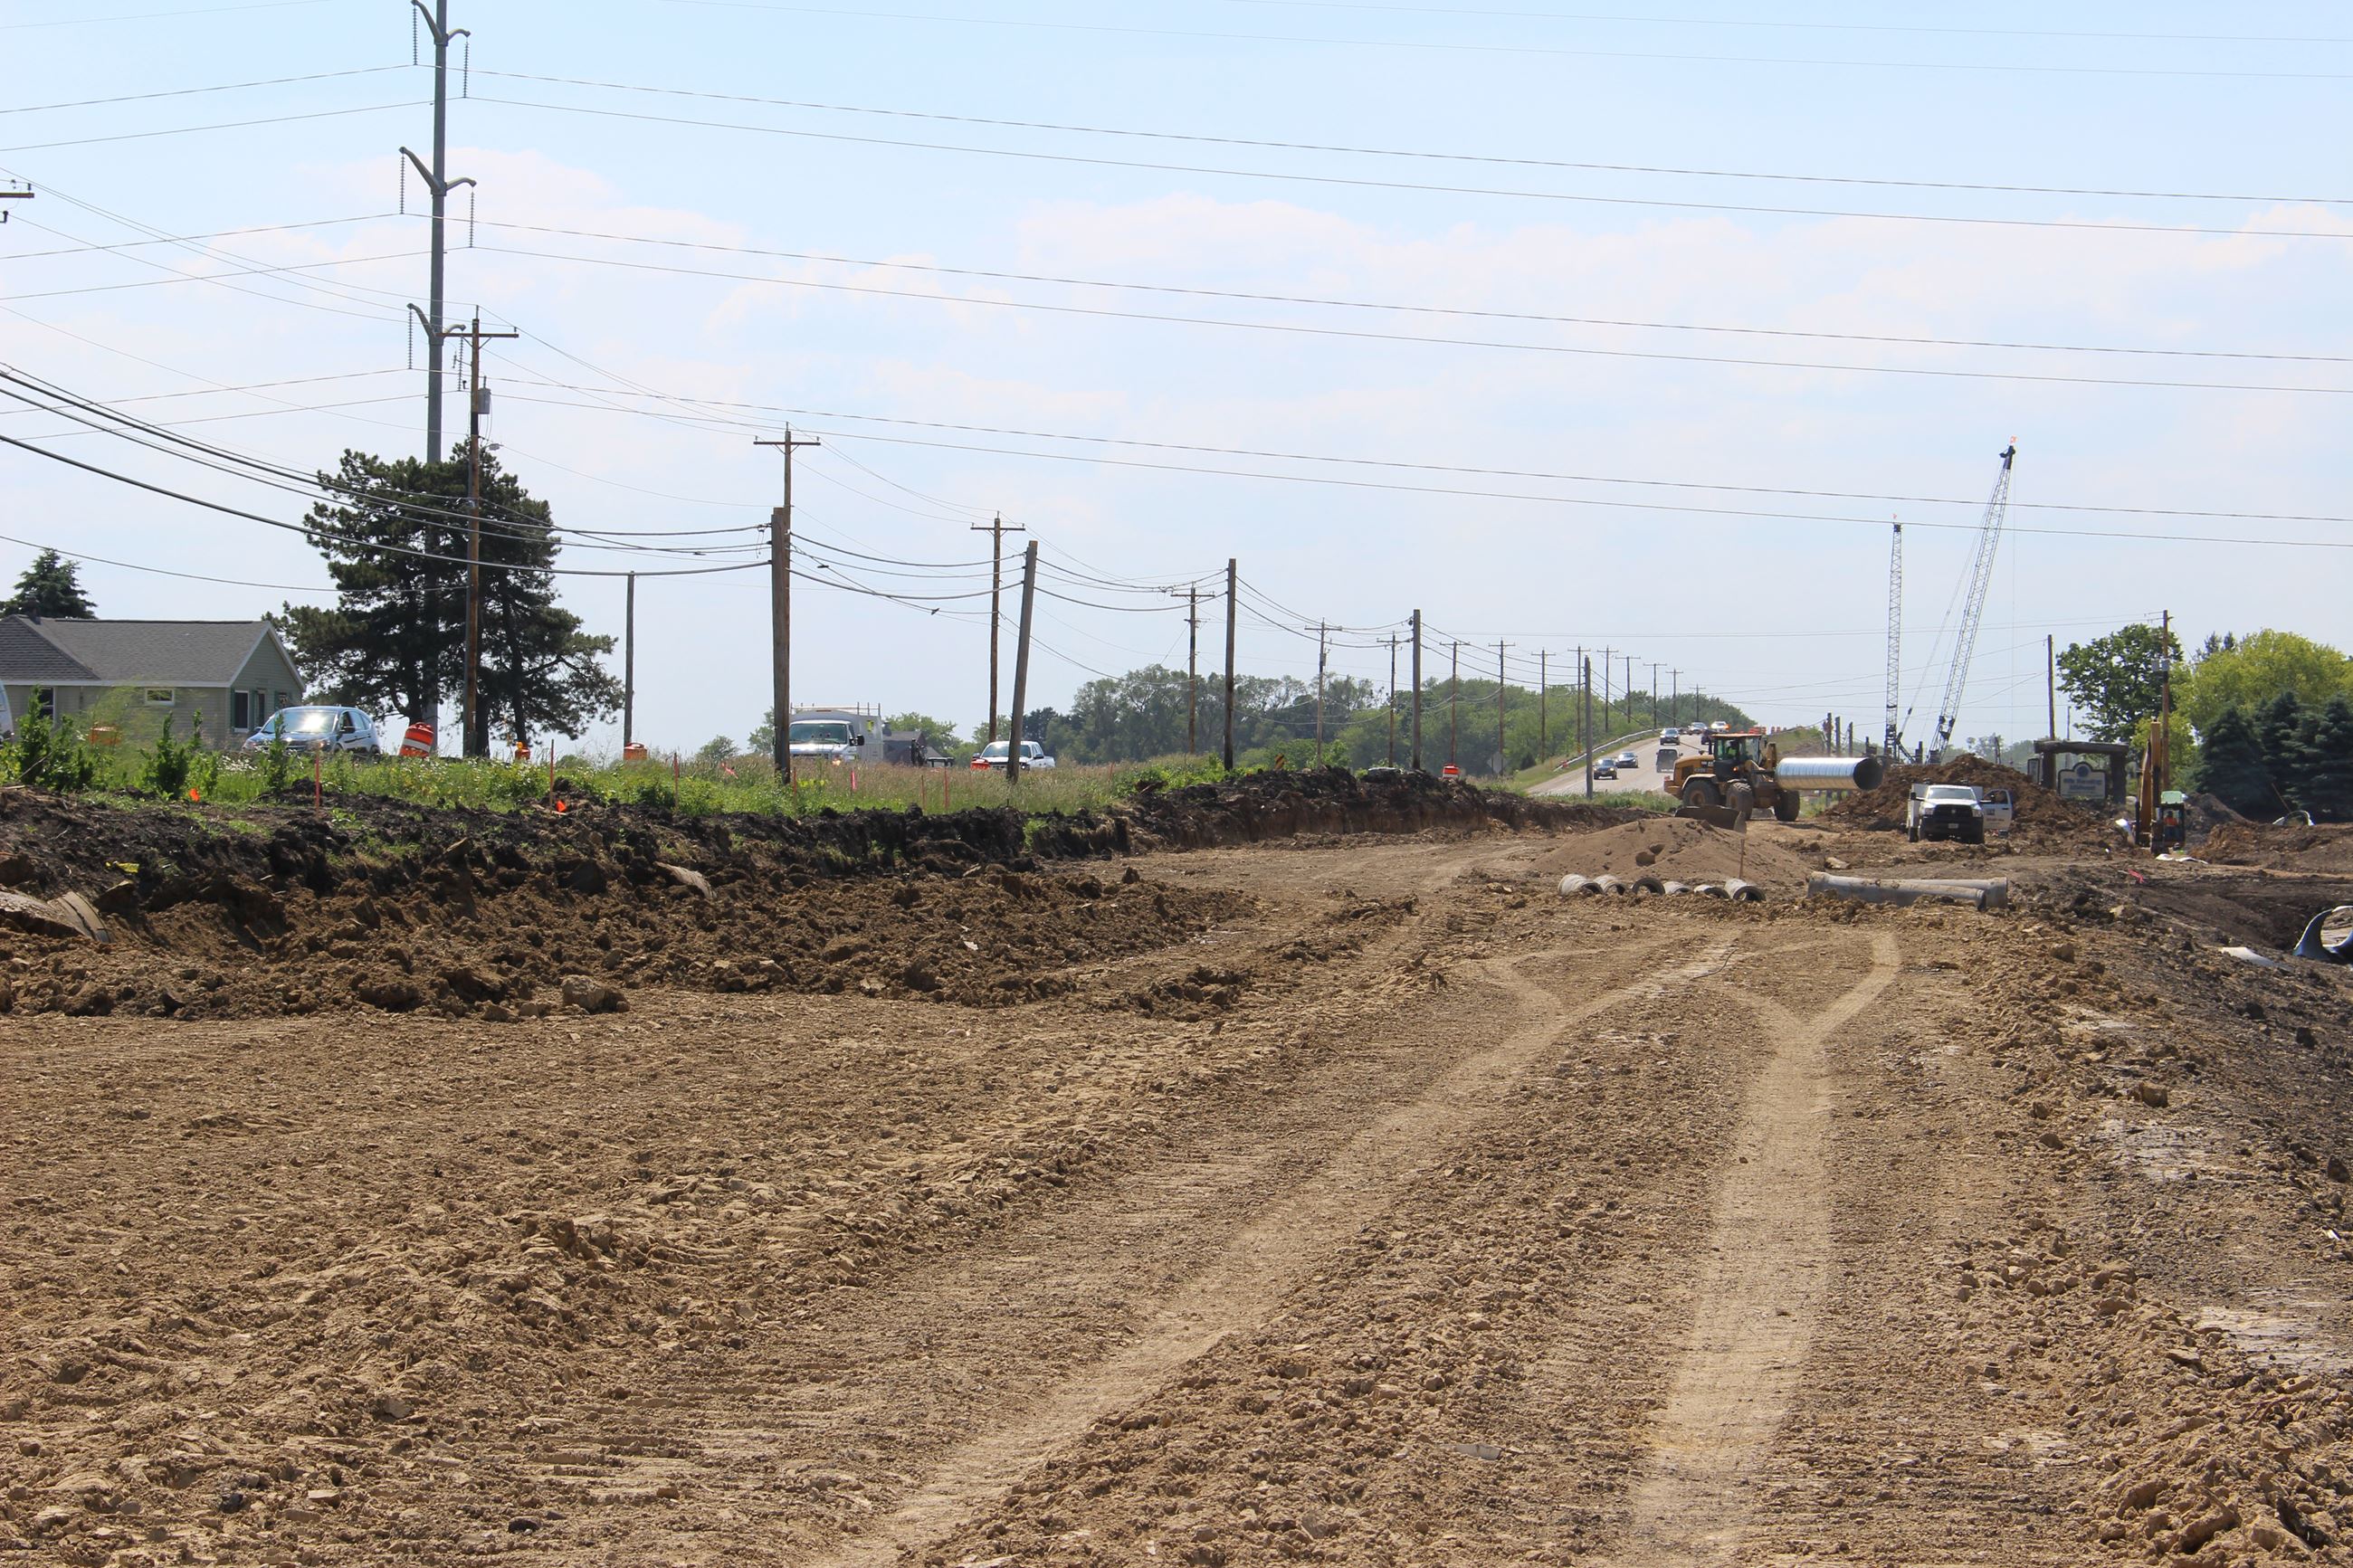 View of the Highway S expansion project looking west from Highway EA